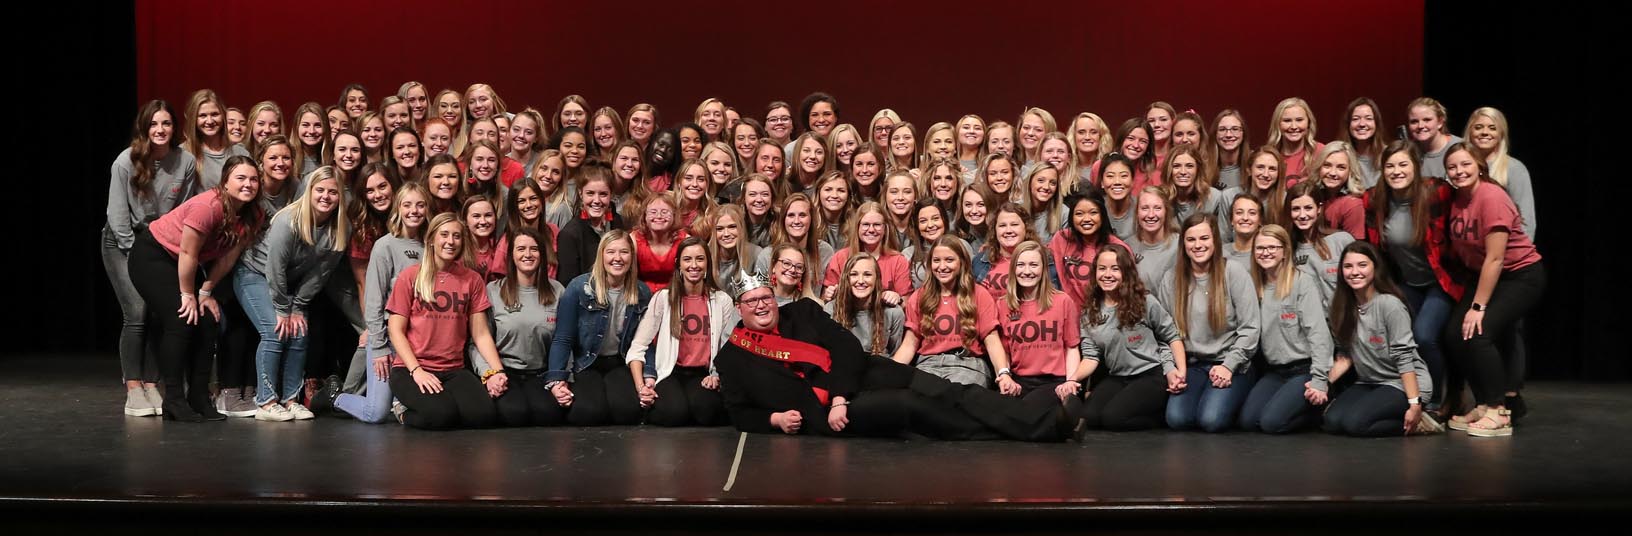 Adam Schultis poses with members of the Alpha Phi sorority after he was named Mr. King of Hearts during Thursday evening's fundraiser at Kearney High School. (Photos by Corbey R. Dorsey, UNK Communications)